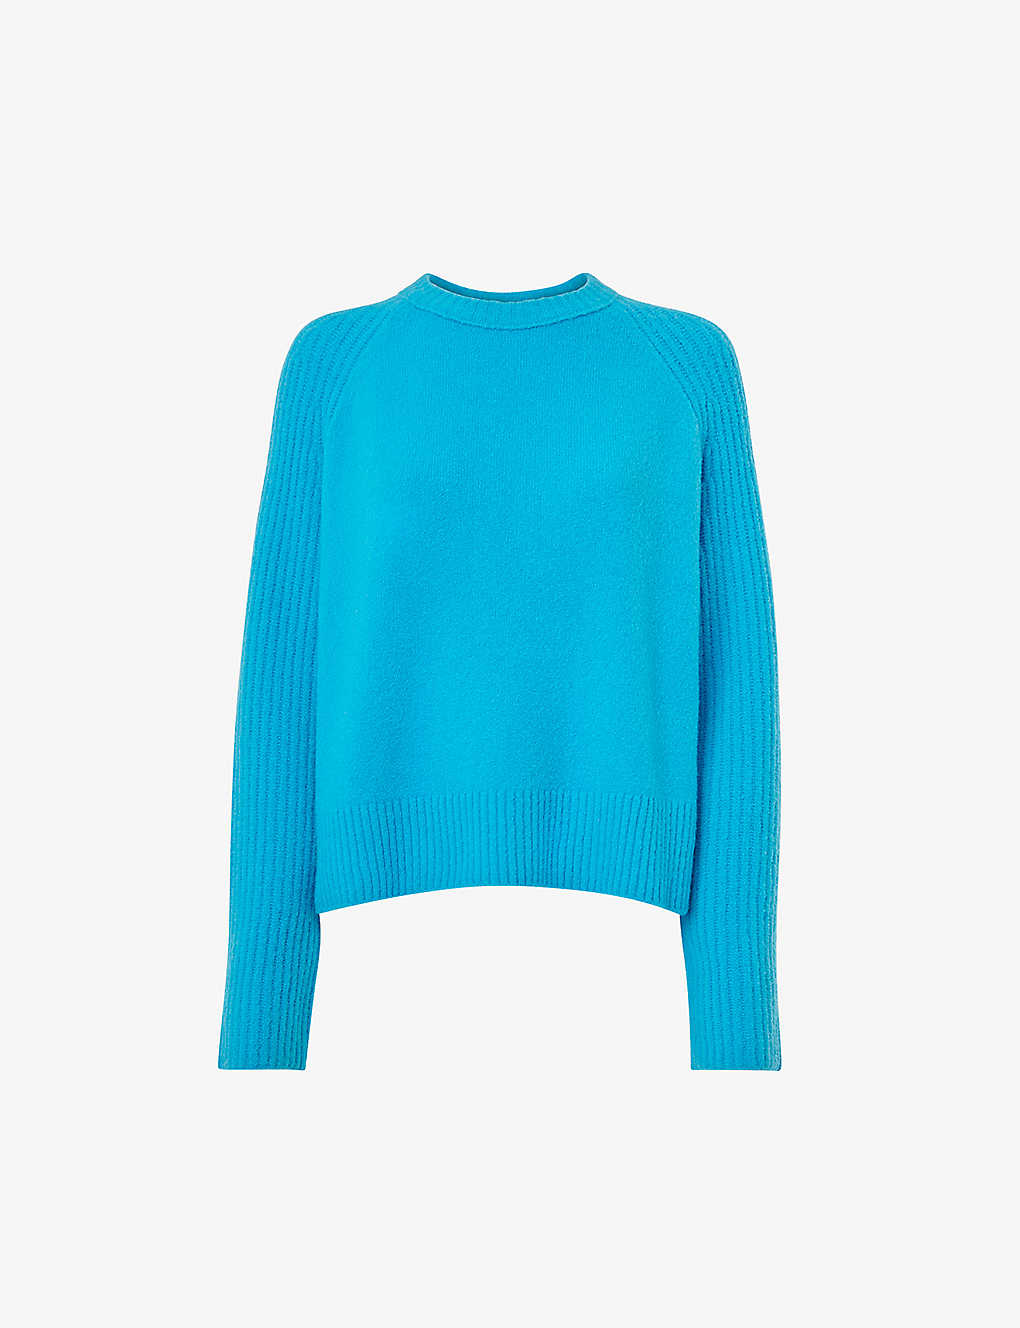 Whistles Anna Mixed Knit Jumper In Turquoise